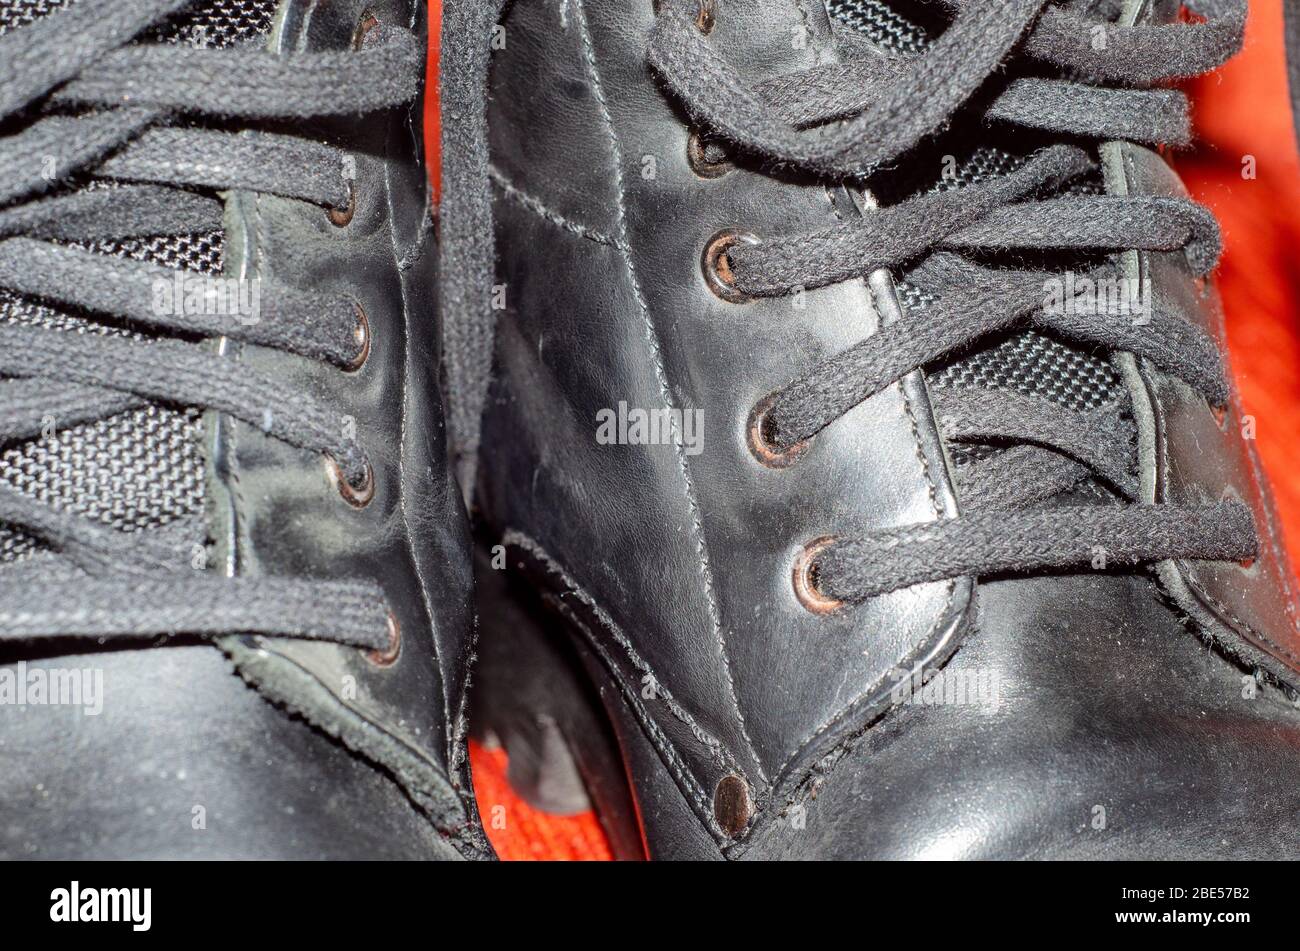 Old Black Leather Boots, Vintage Stock Photo - Alamy